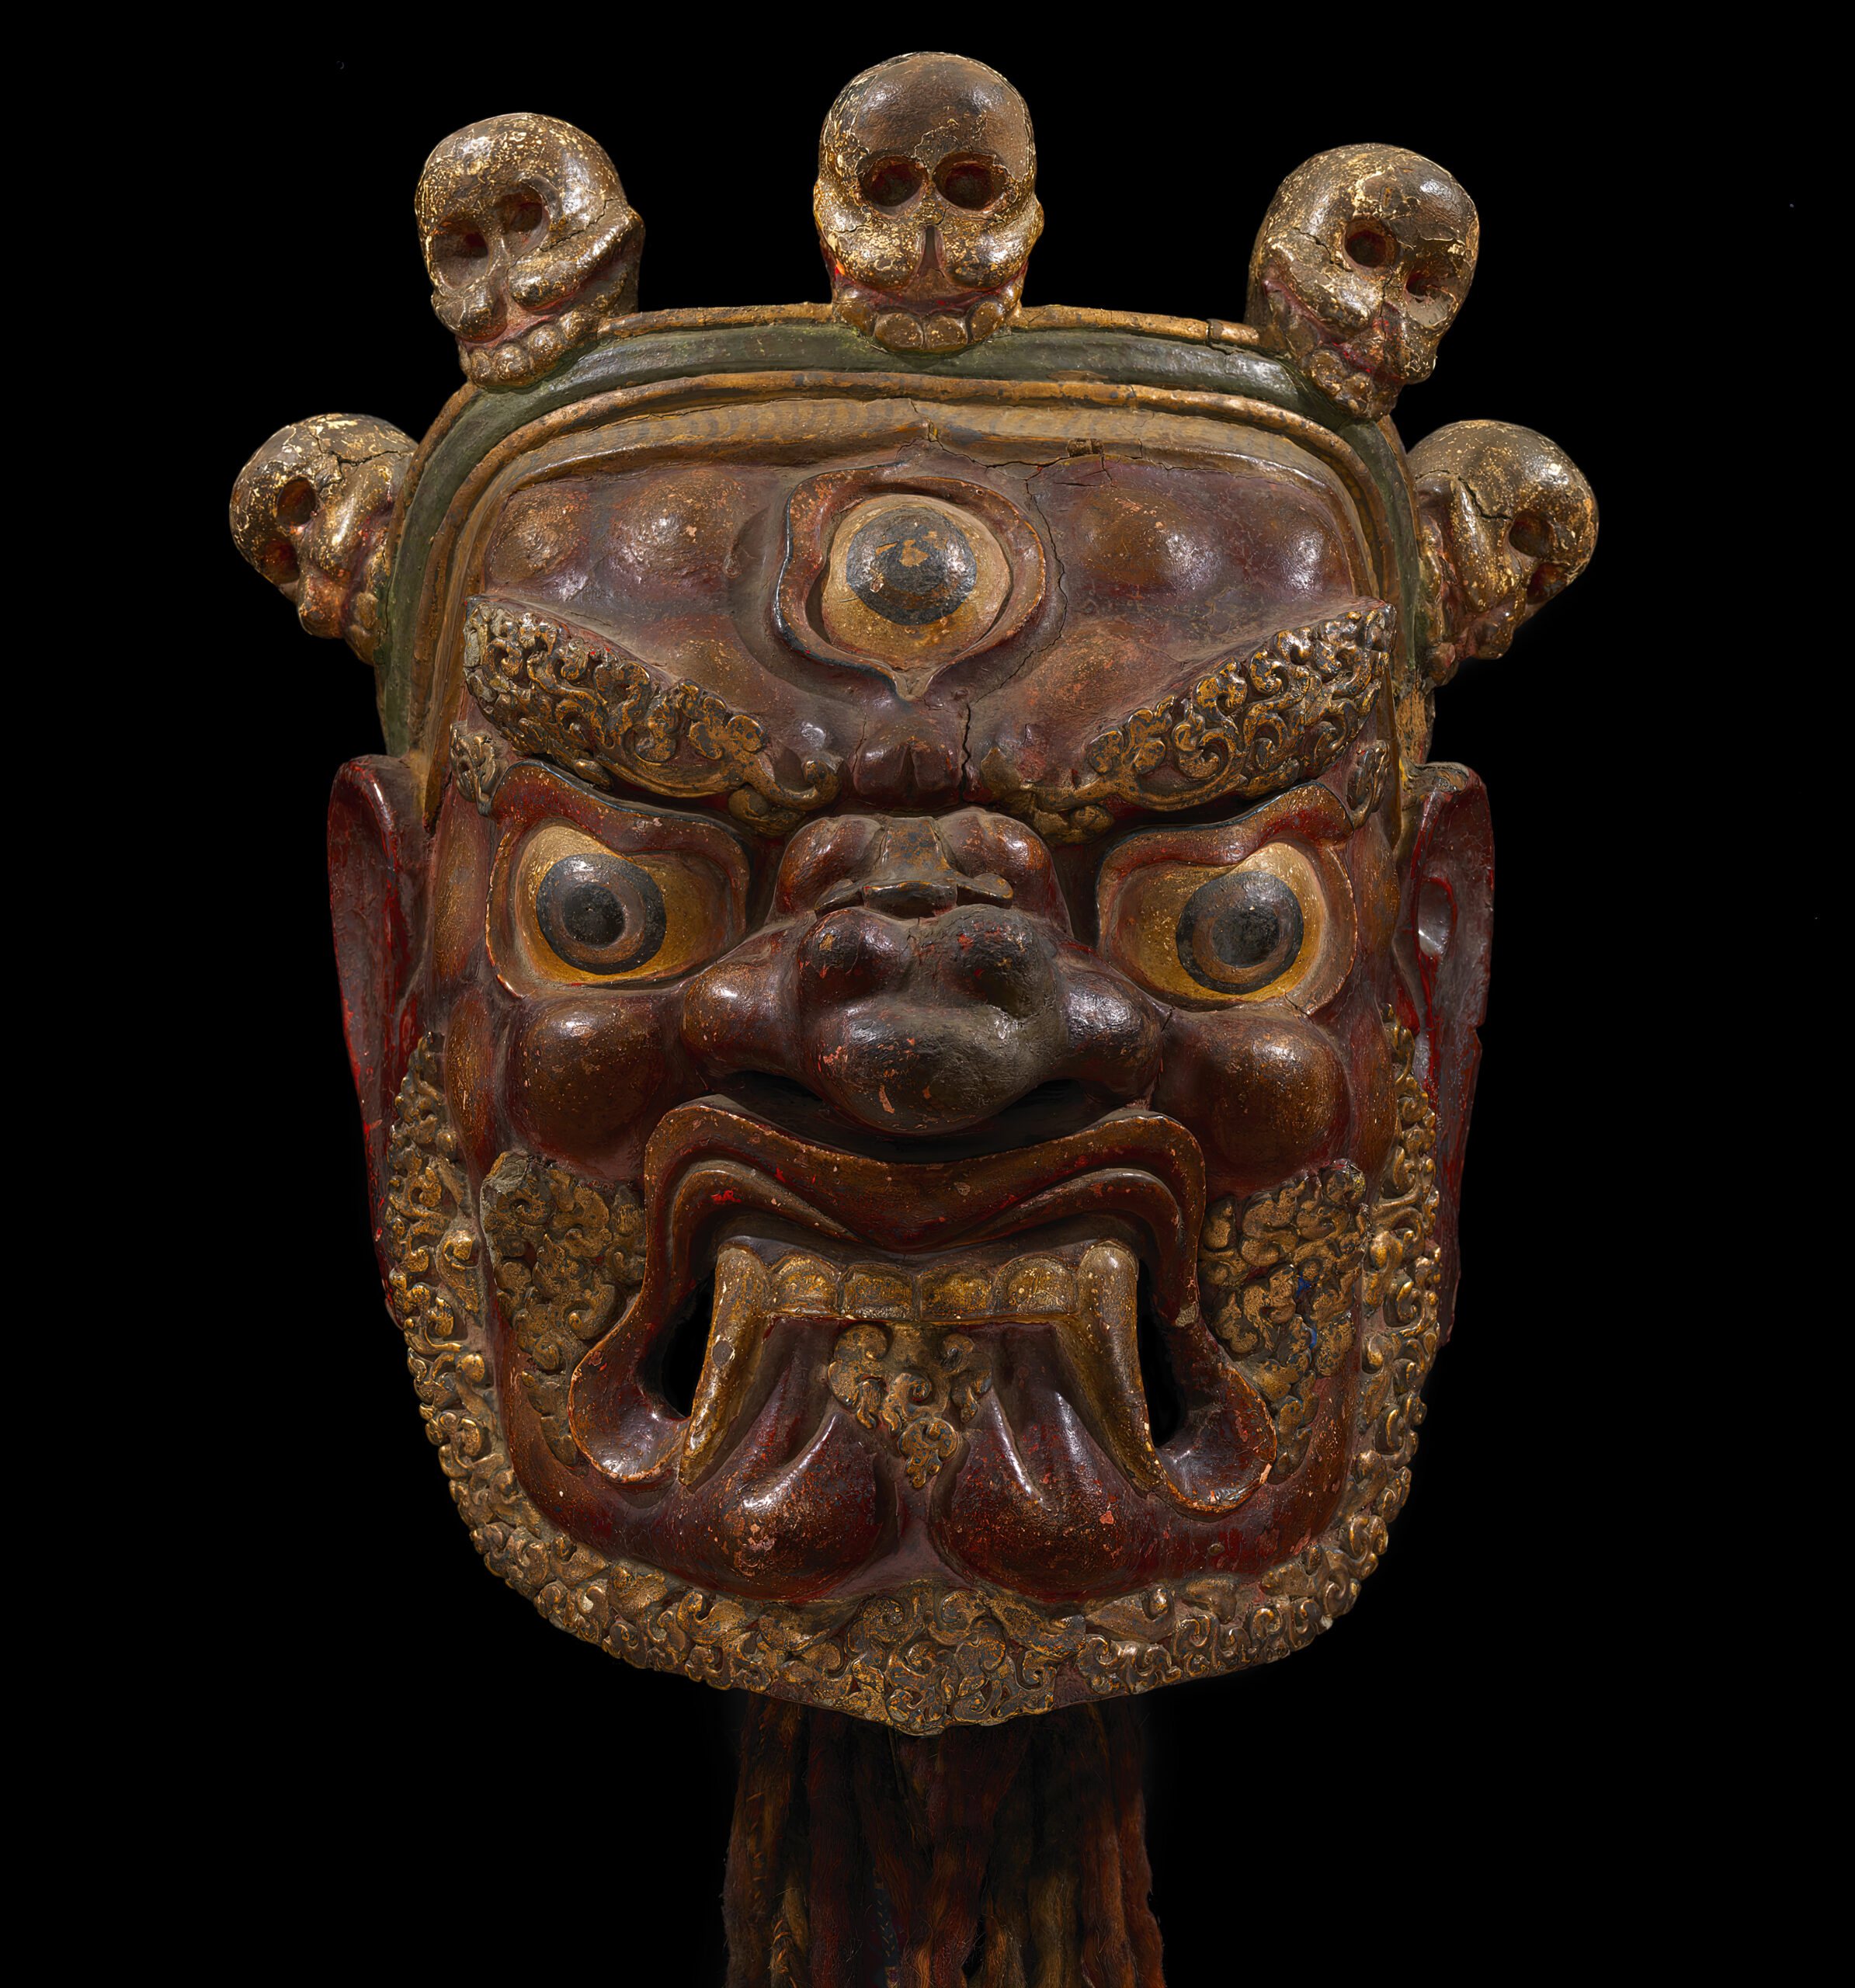 Mask depicting wrathful deity with third eye and bared teeth; features five-skull crown and filigreed beard